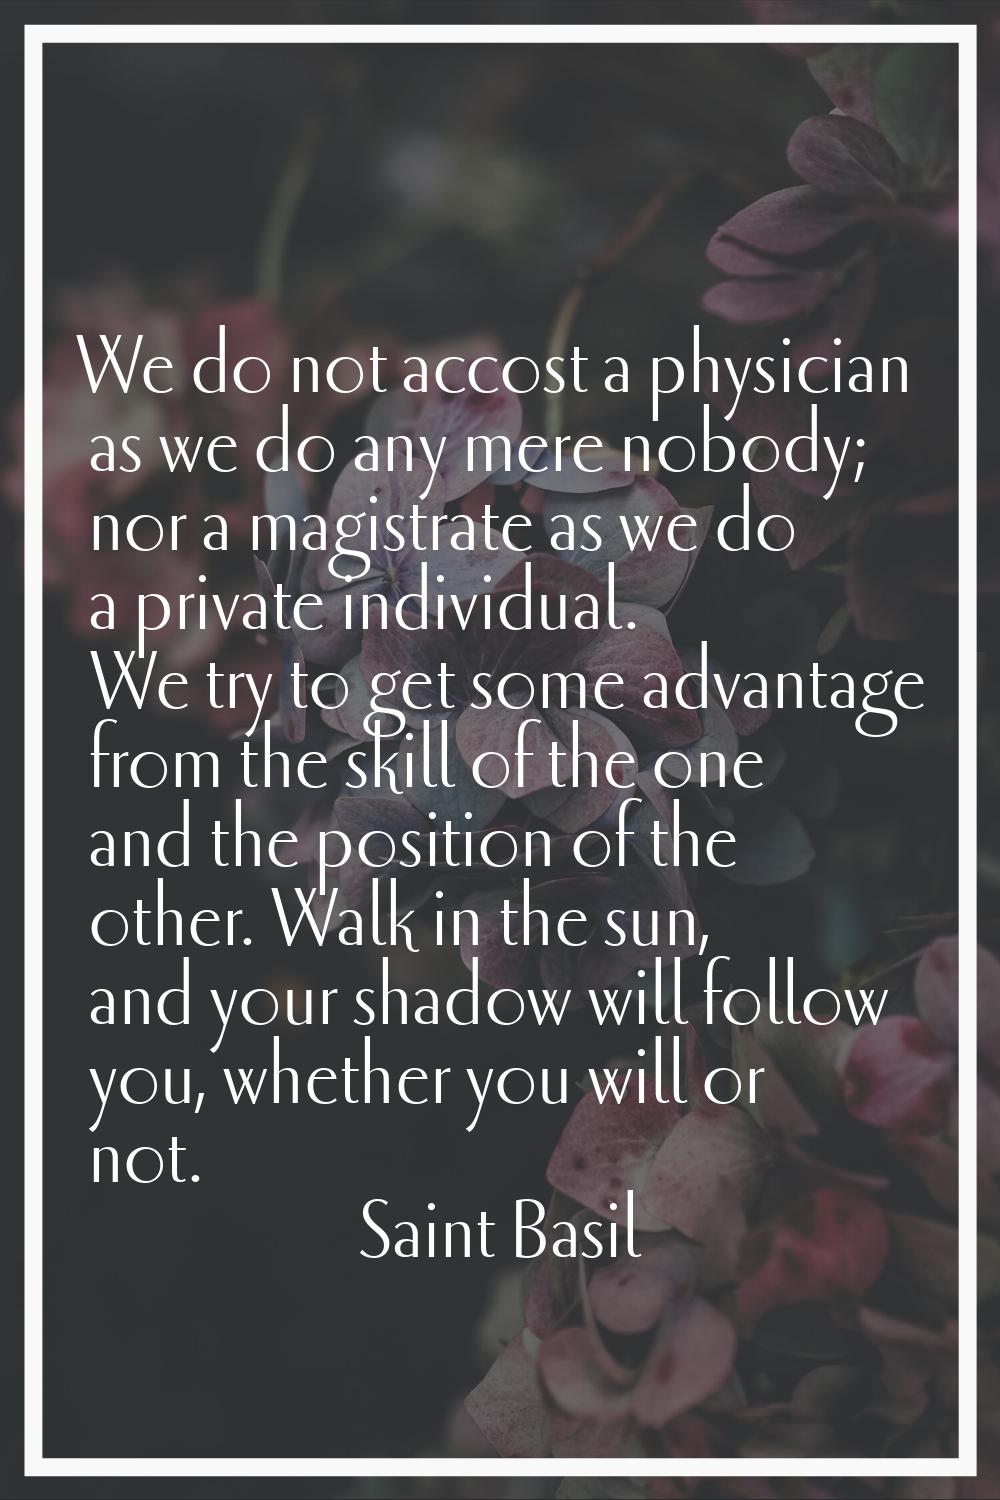 We do not accost a physician as we do any mere nobody; nor a magistrate as we do a private individu